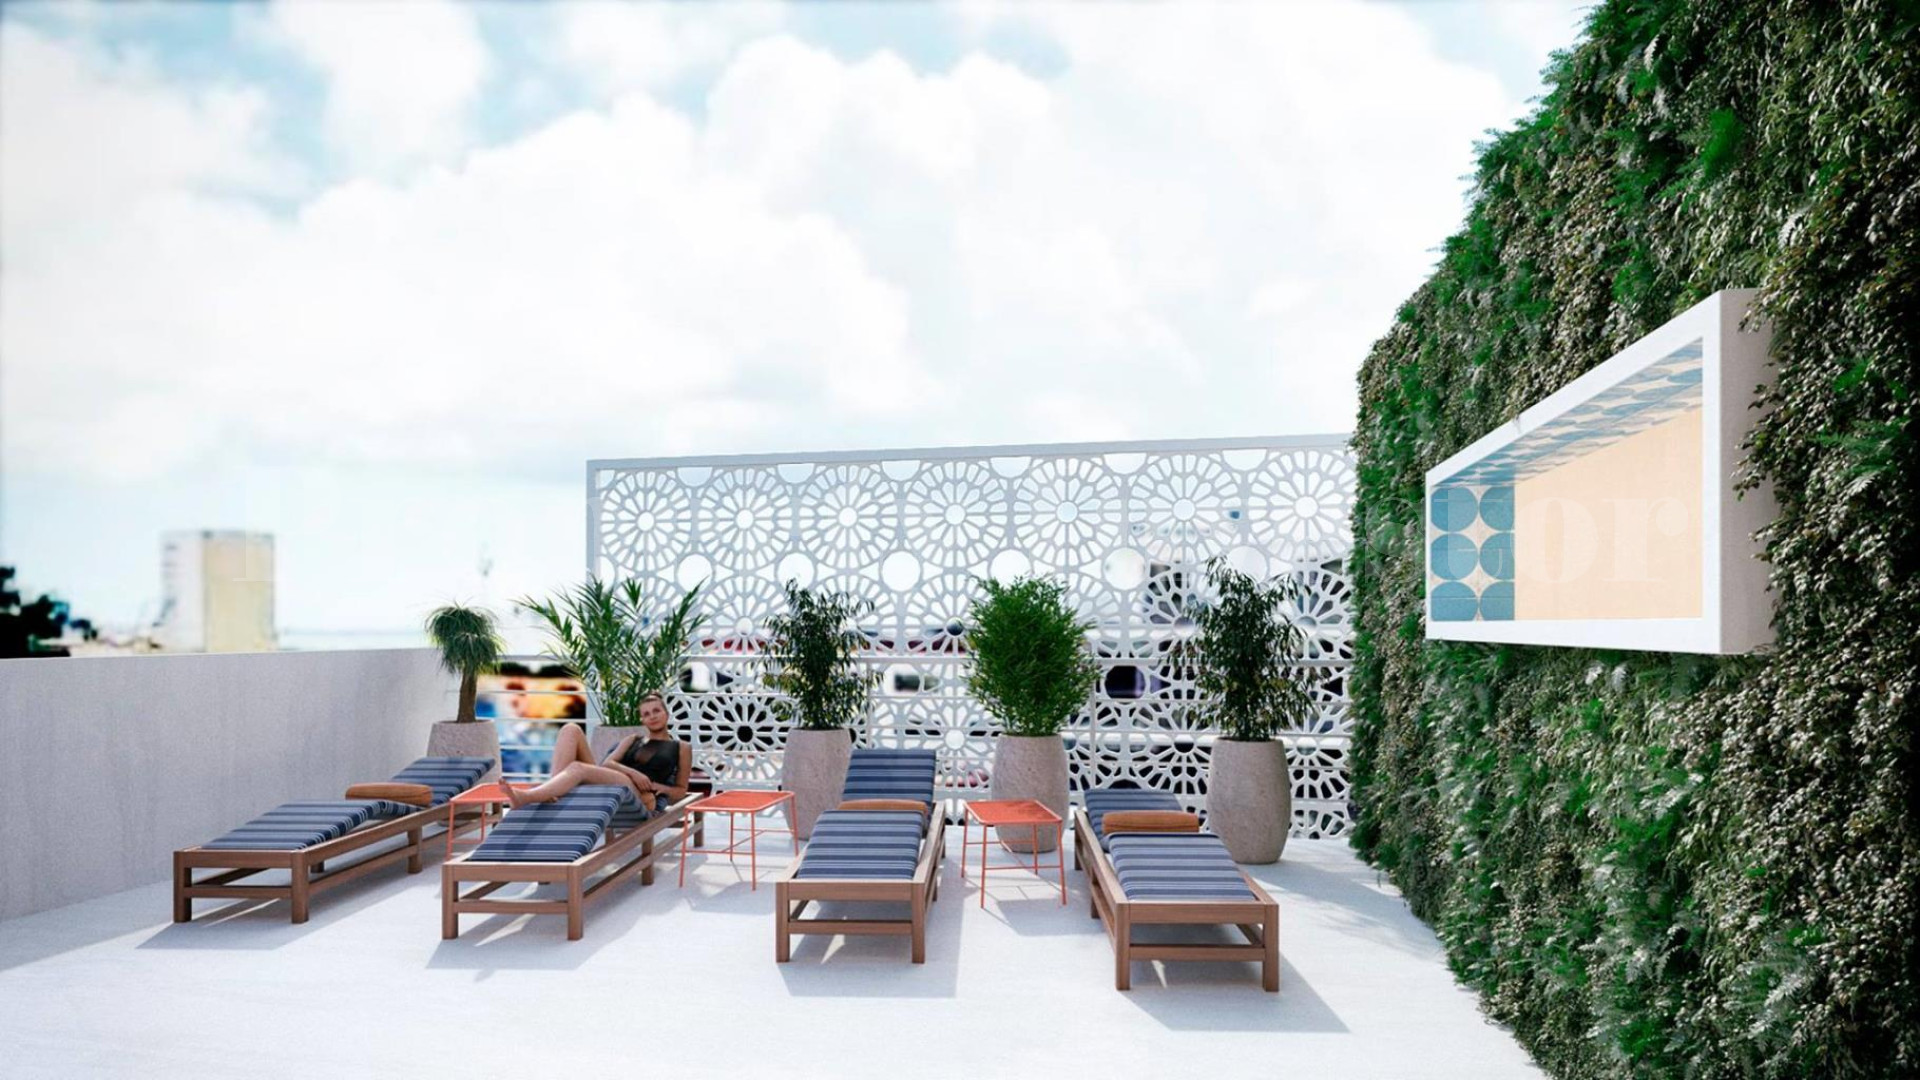 One-of-a-kind 20 Room Boutique Hotel for Sale Near 5th Avenue in Playa del Carmen, Mexico